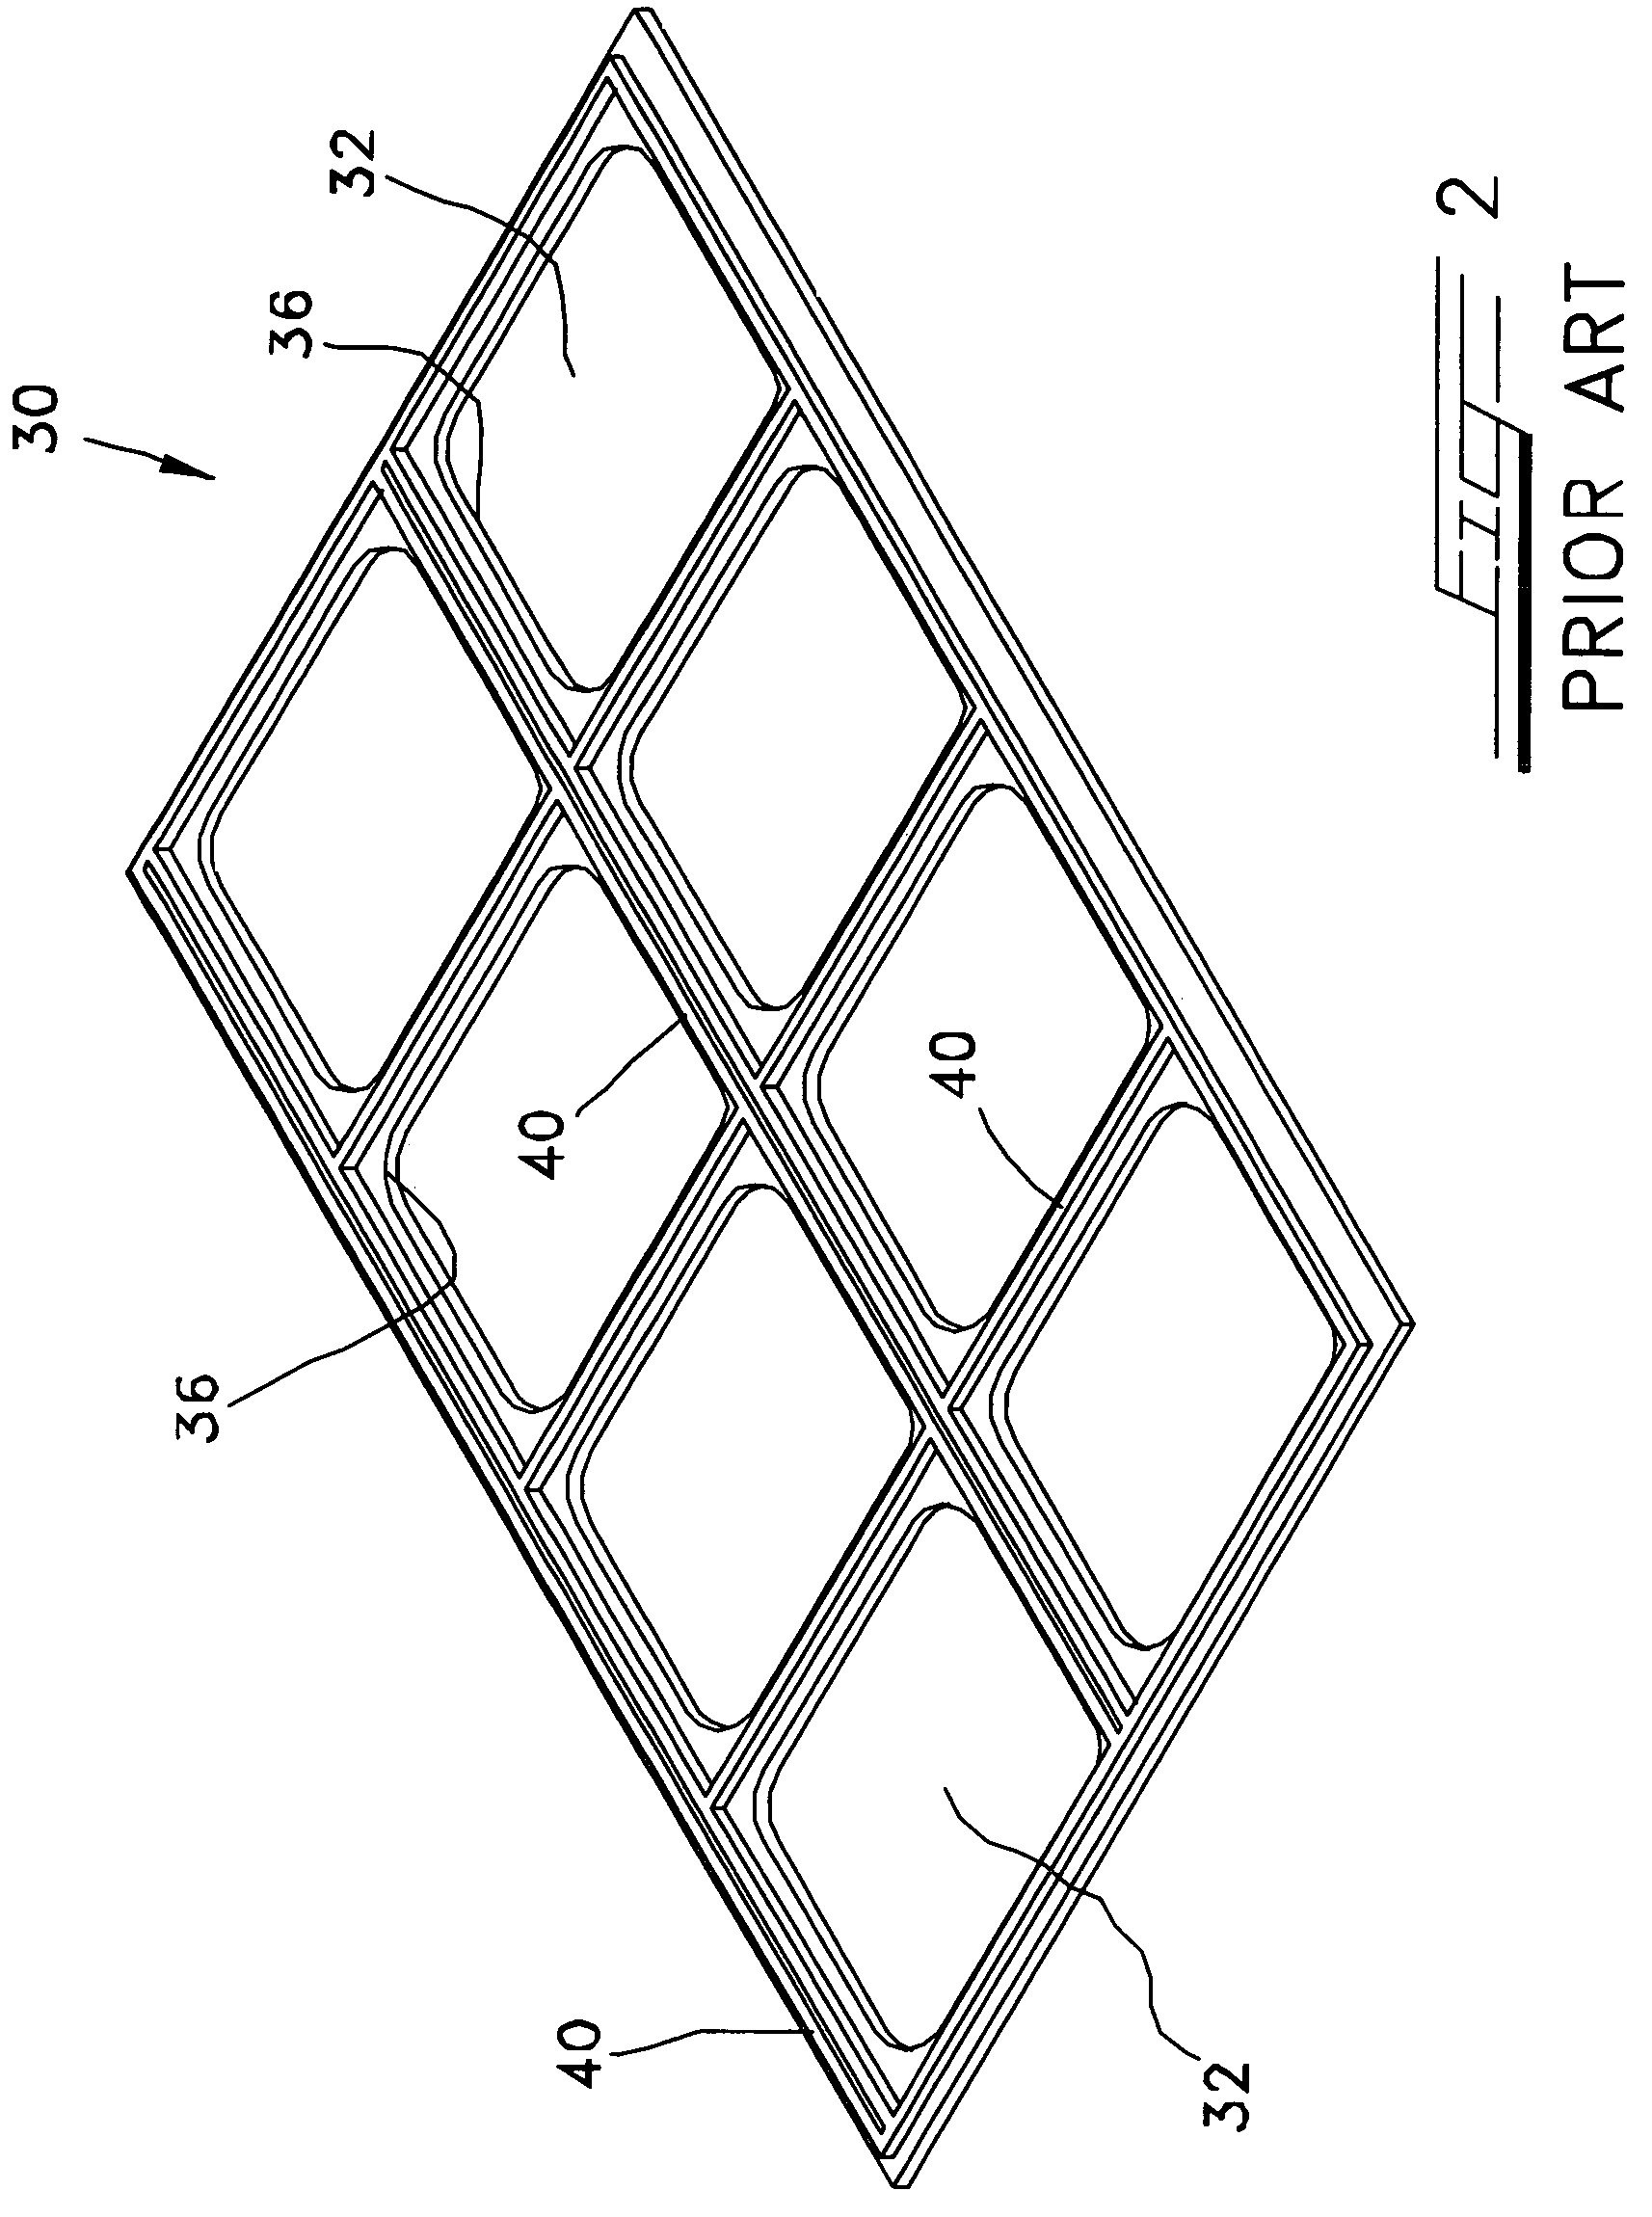 Sealing gasket for lower tool of a sealing station of a vacuum packaging machine